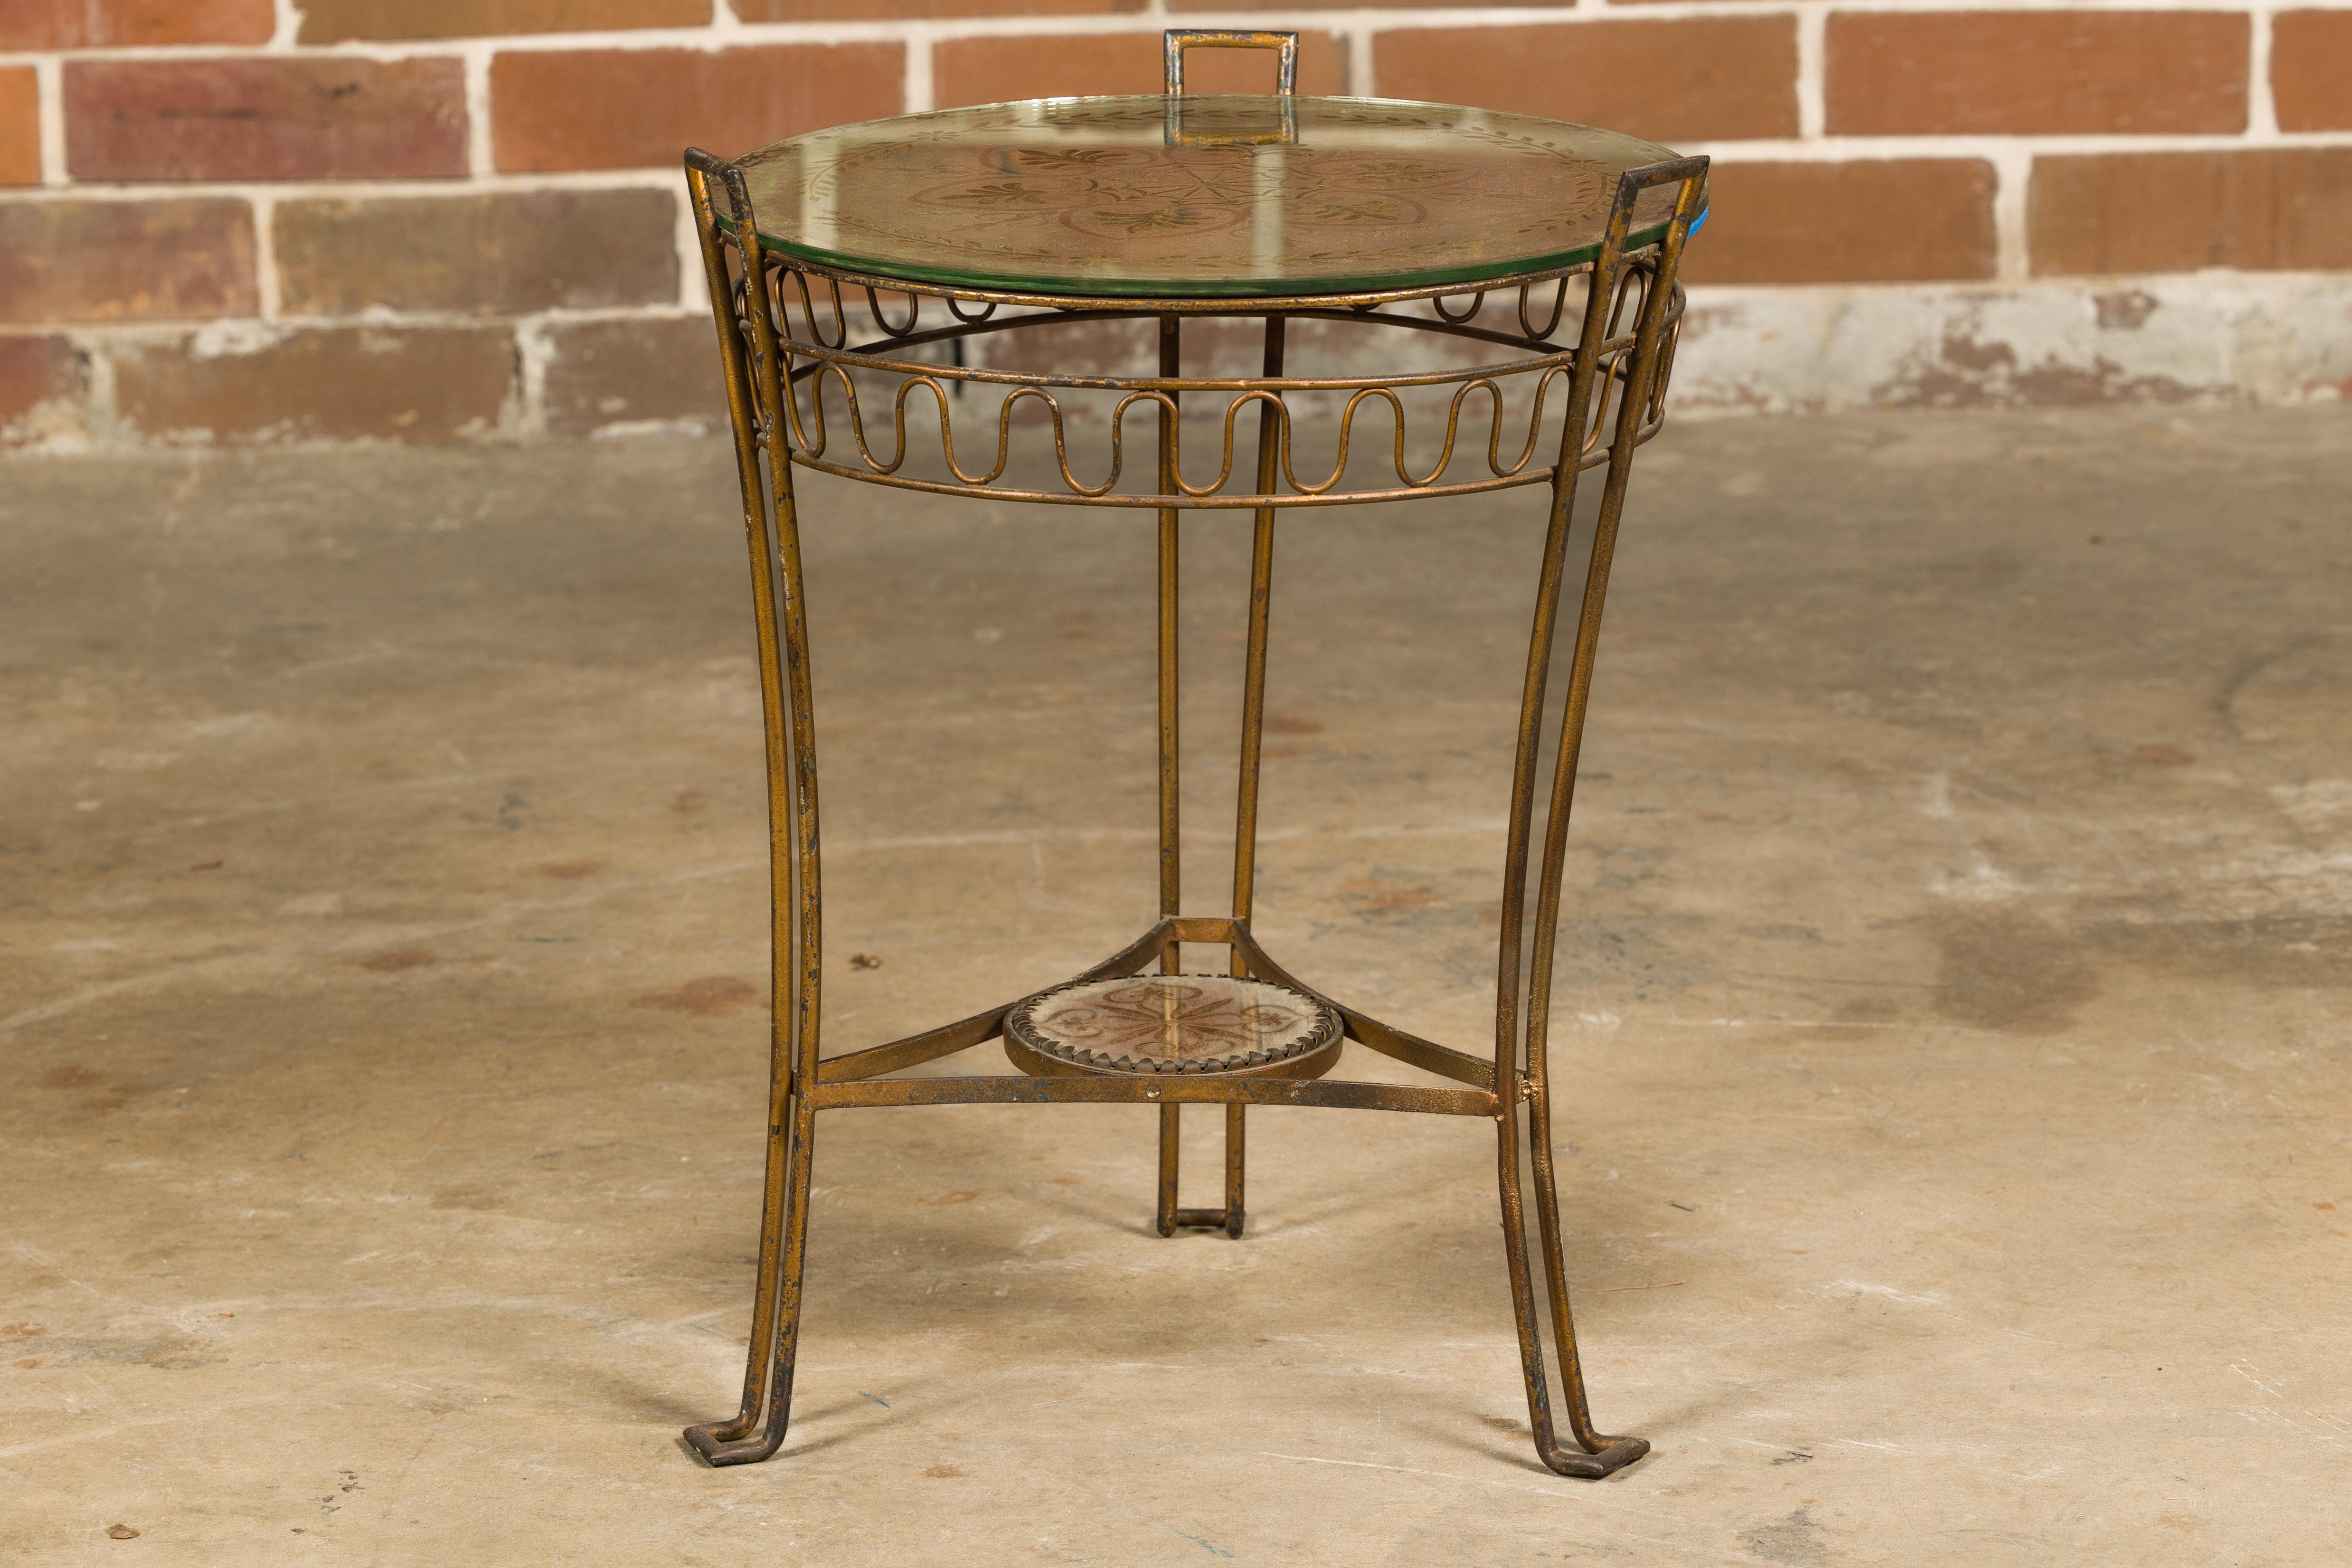 French 1920s Gilt Iron Side Table with Etched Foliage Mirrored Top and Low Shelf For Sale 11